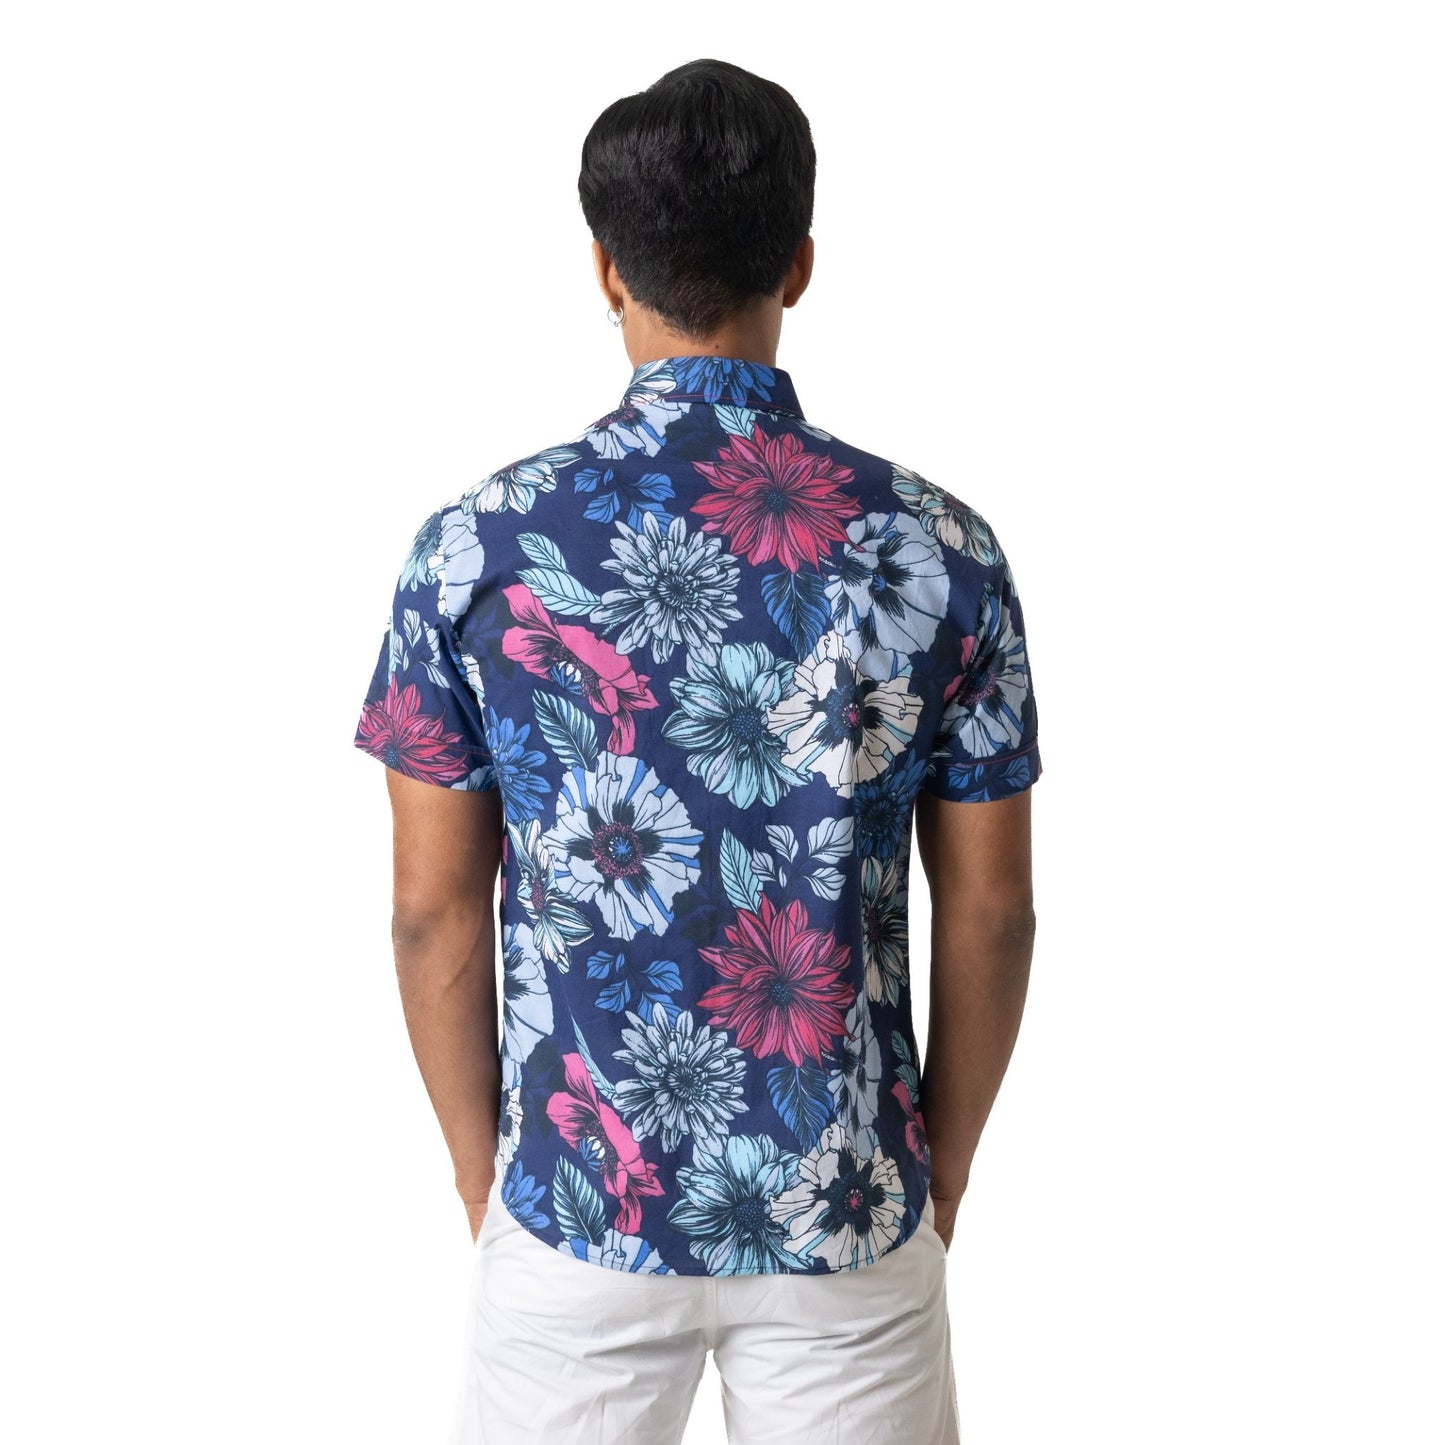 Short sleeve shirt in navy floral printed voile